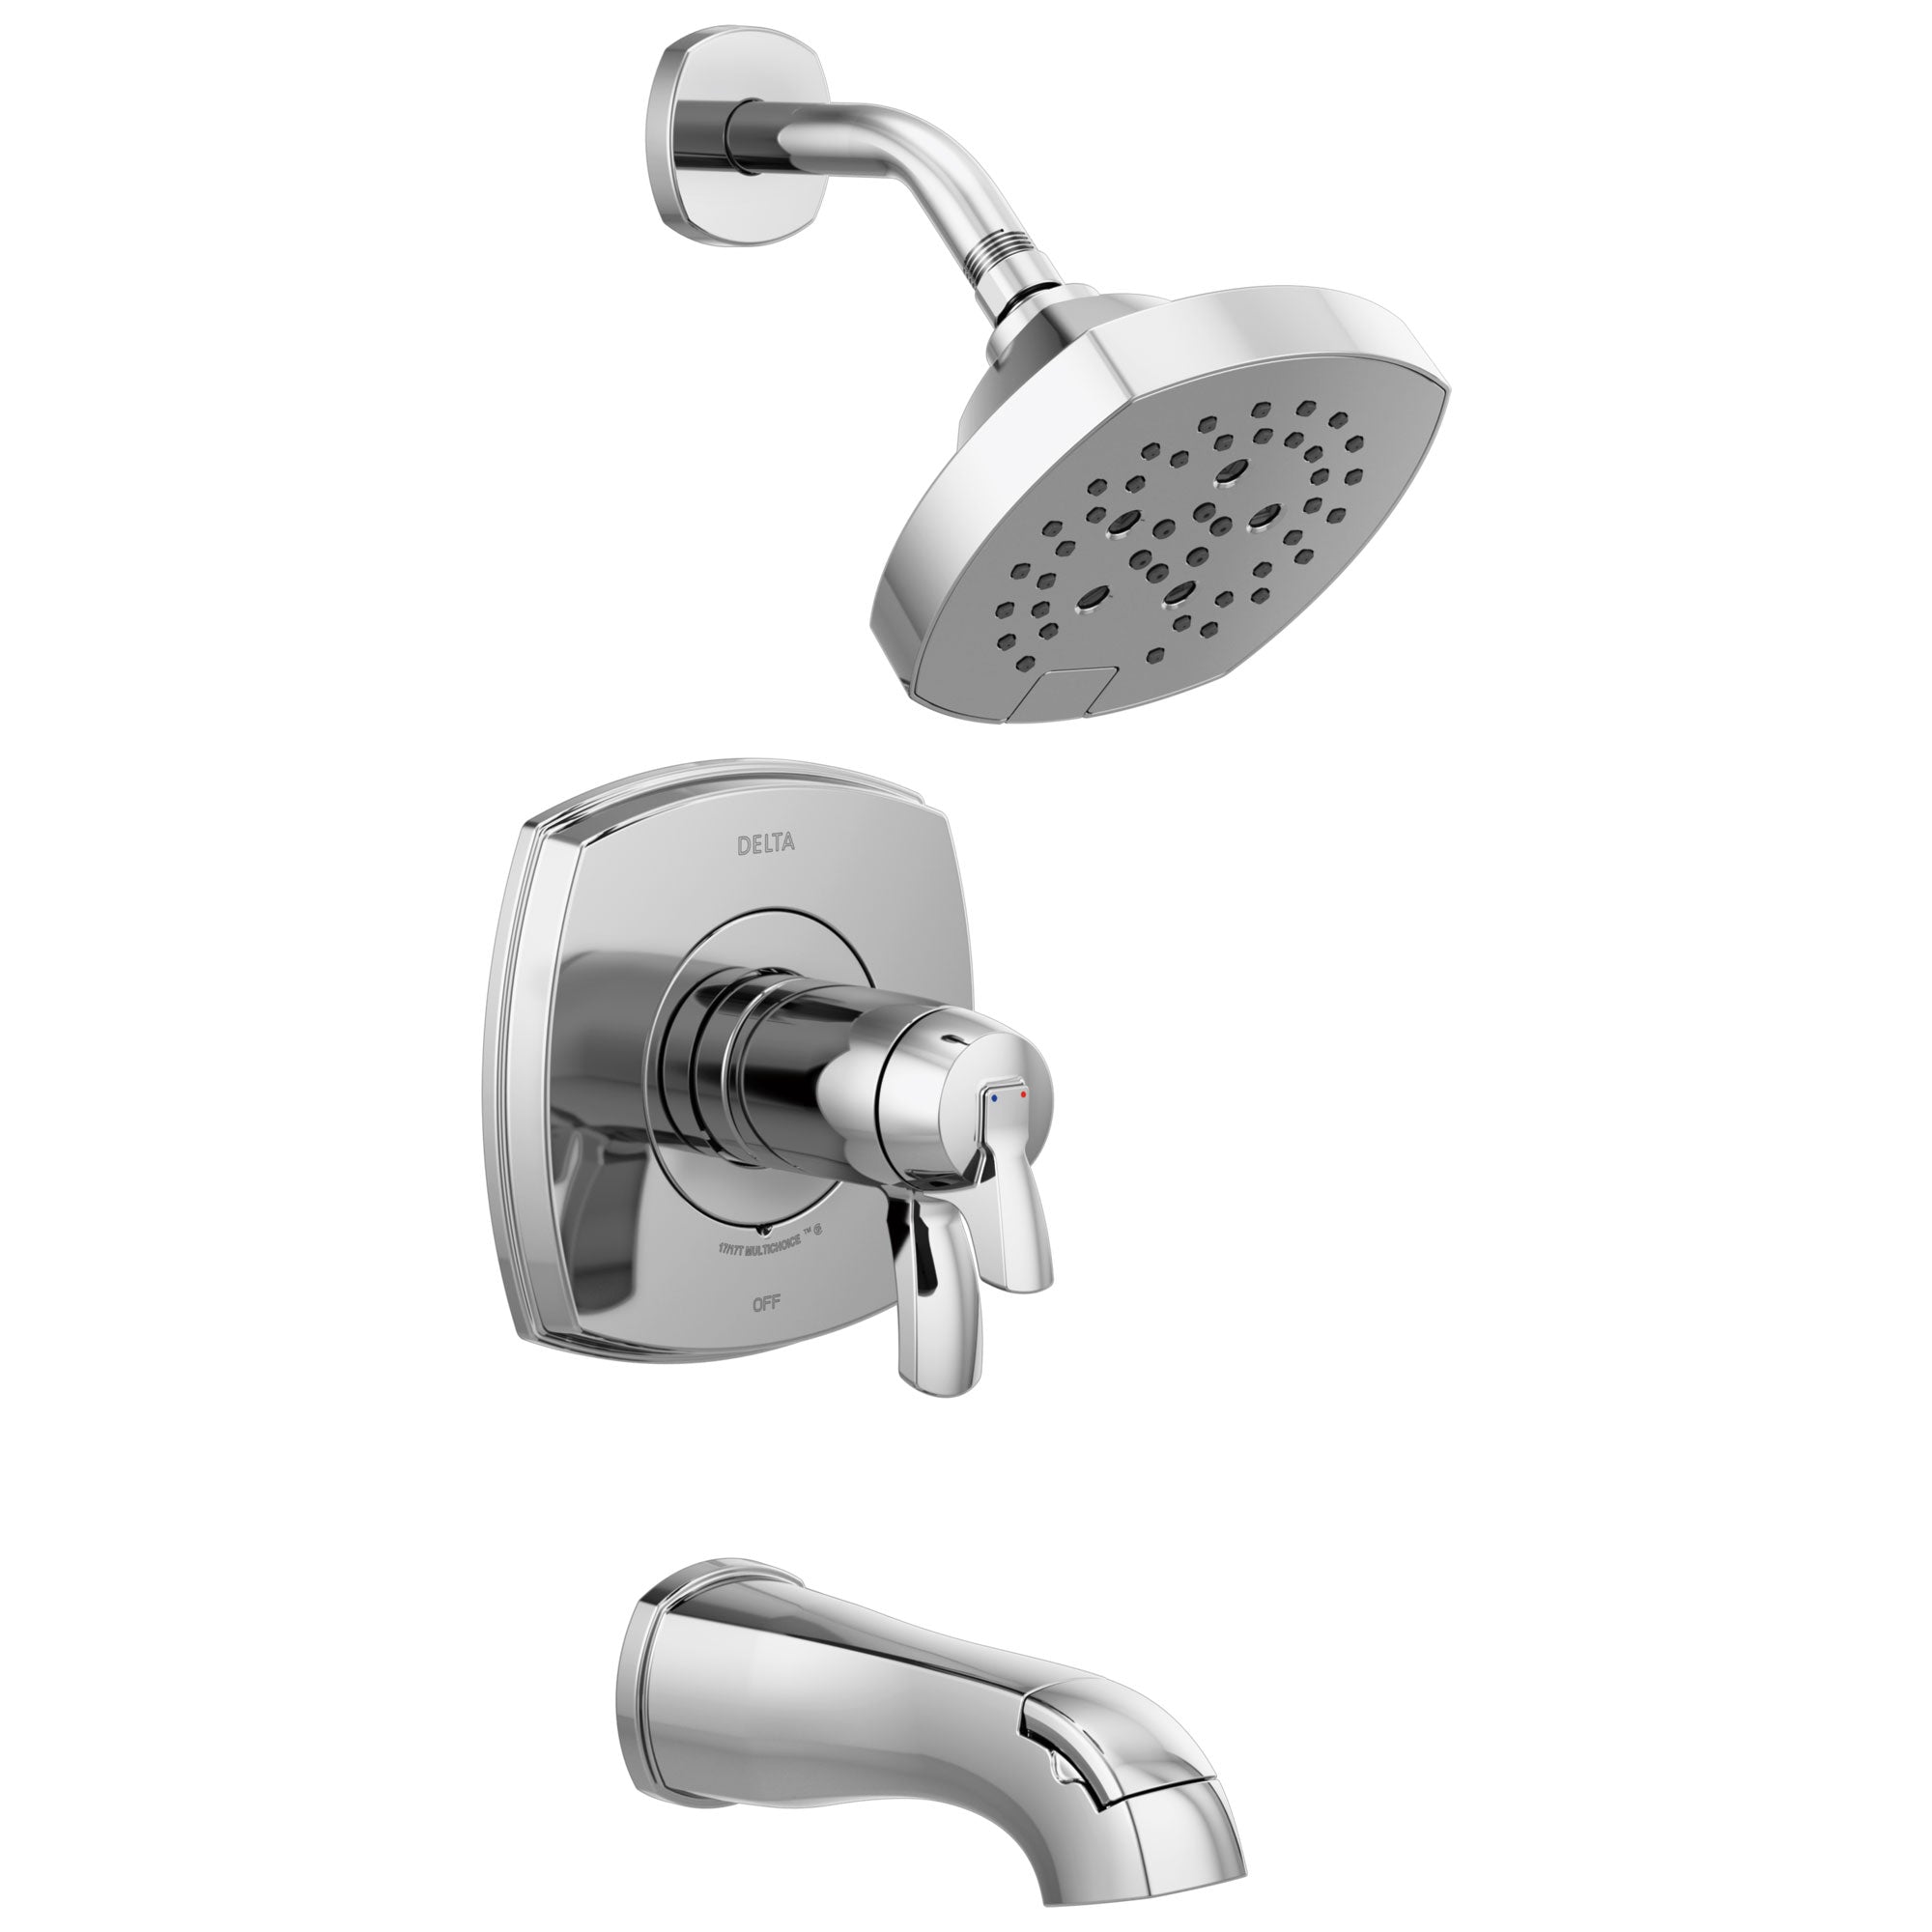 Delta Stryke Chrome Finish 17T Thermostatic Tub and Shower Faucet Combination Trim Kit (Requires Valve) DT17T476